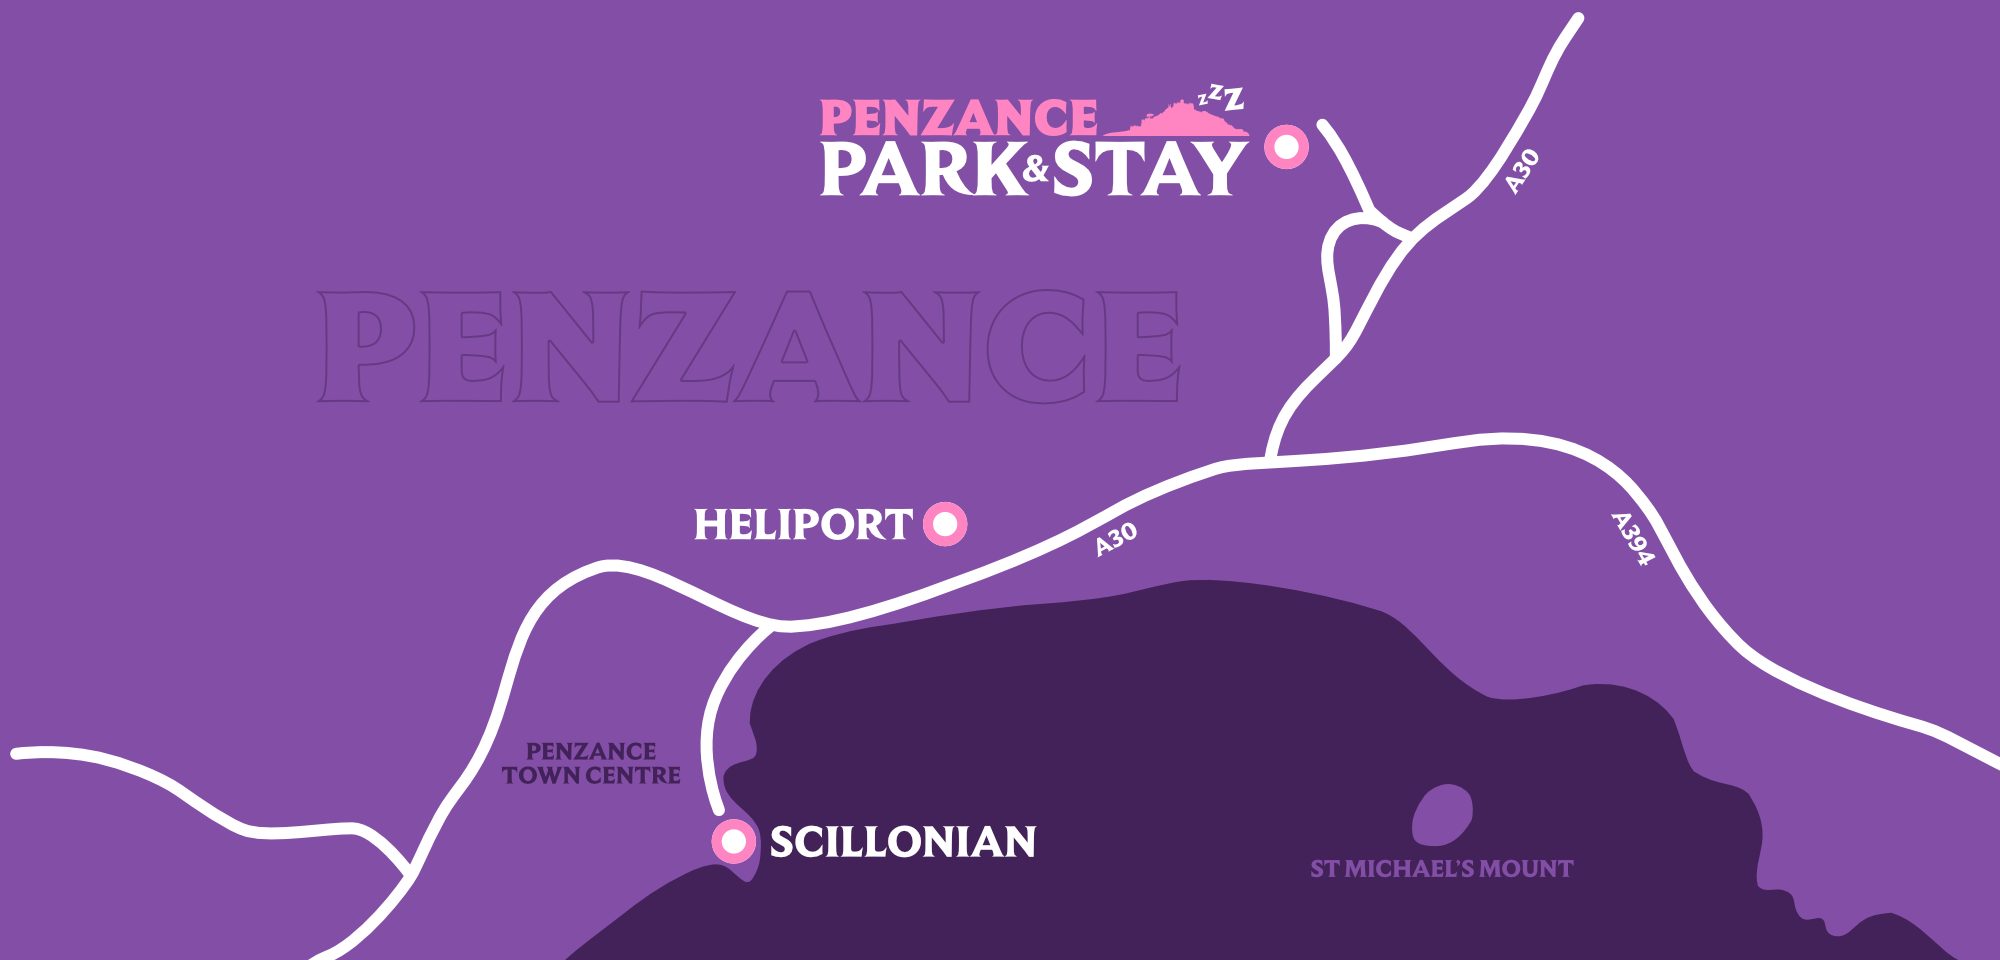 Our location in Penzance